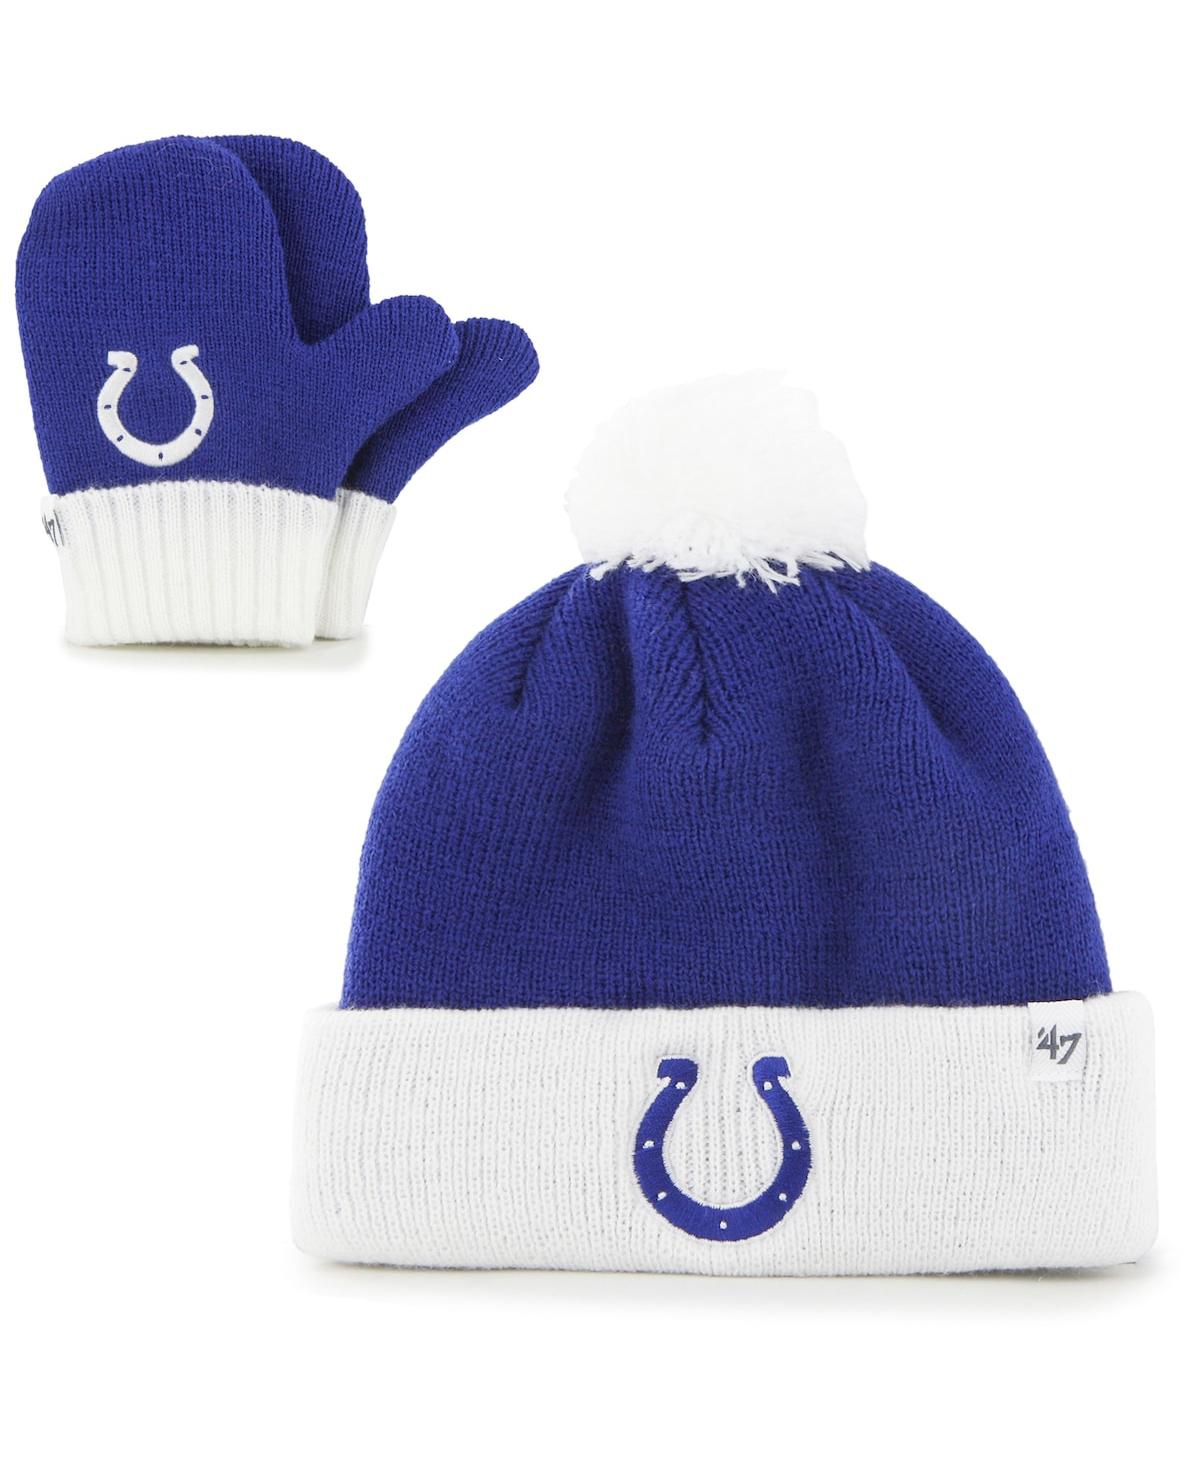 47 Brand Babies' Toddler Unisex Royal And White Indianapolis Colts Bam Bam Cuffed Knit Hat With Pom And Mittens Set In Royal,white